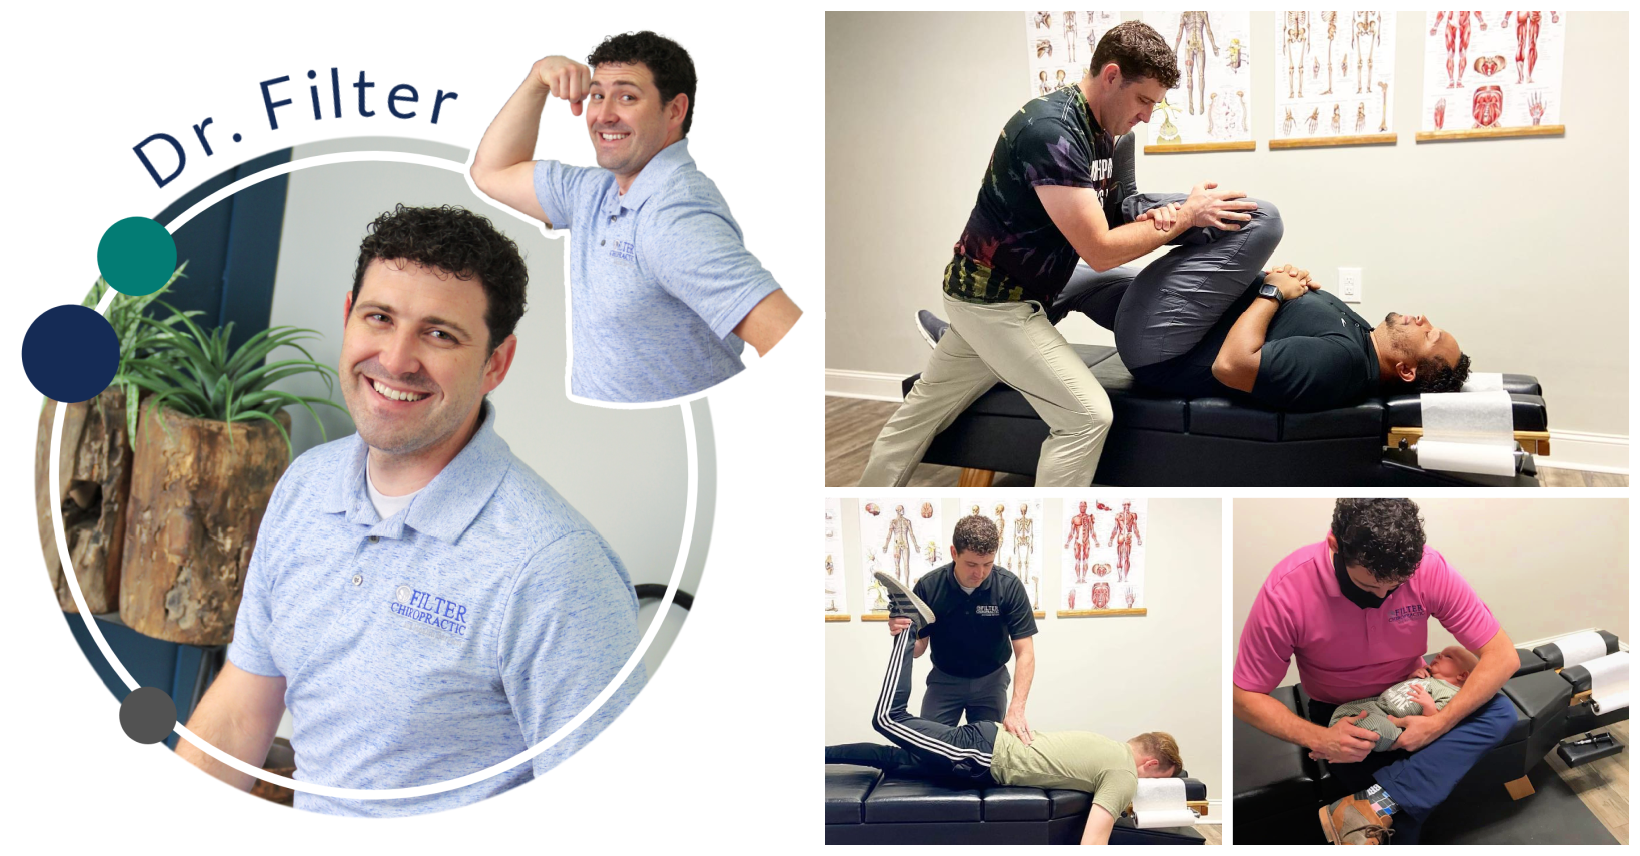 Dr. Brian Filter, DC Filter Chiropractic